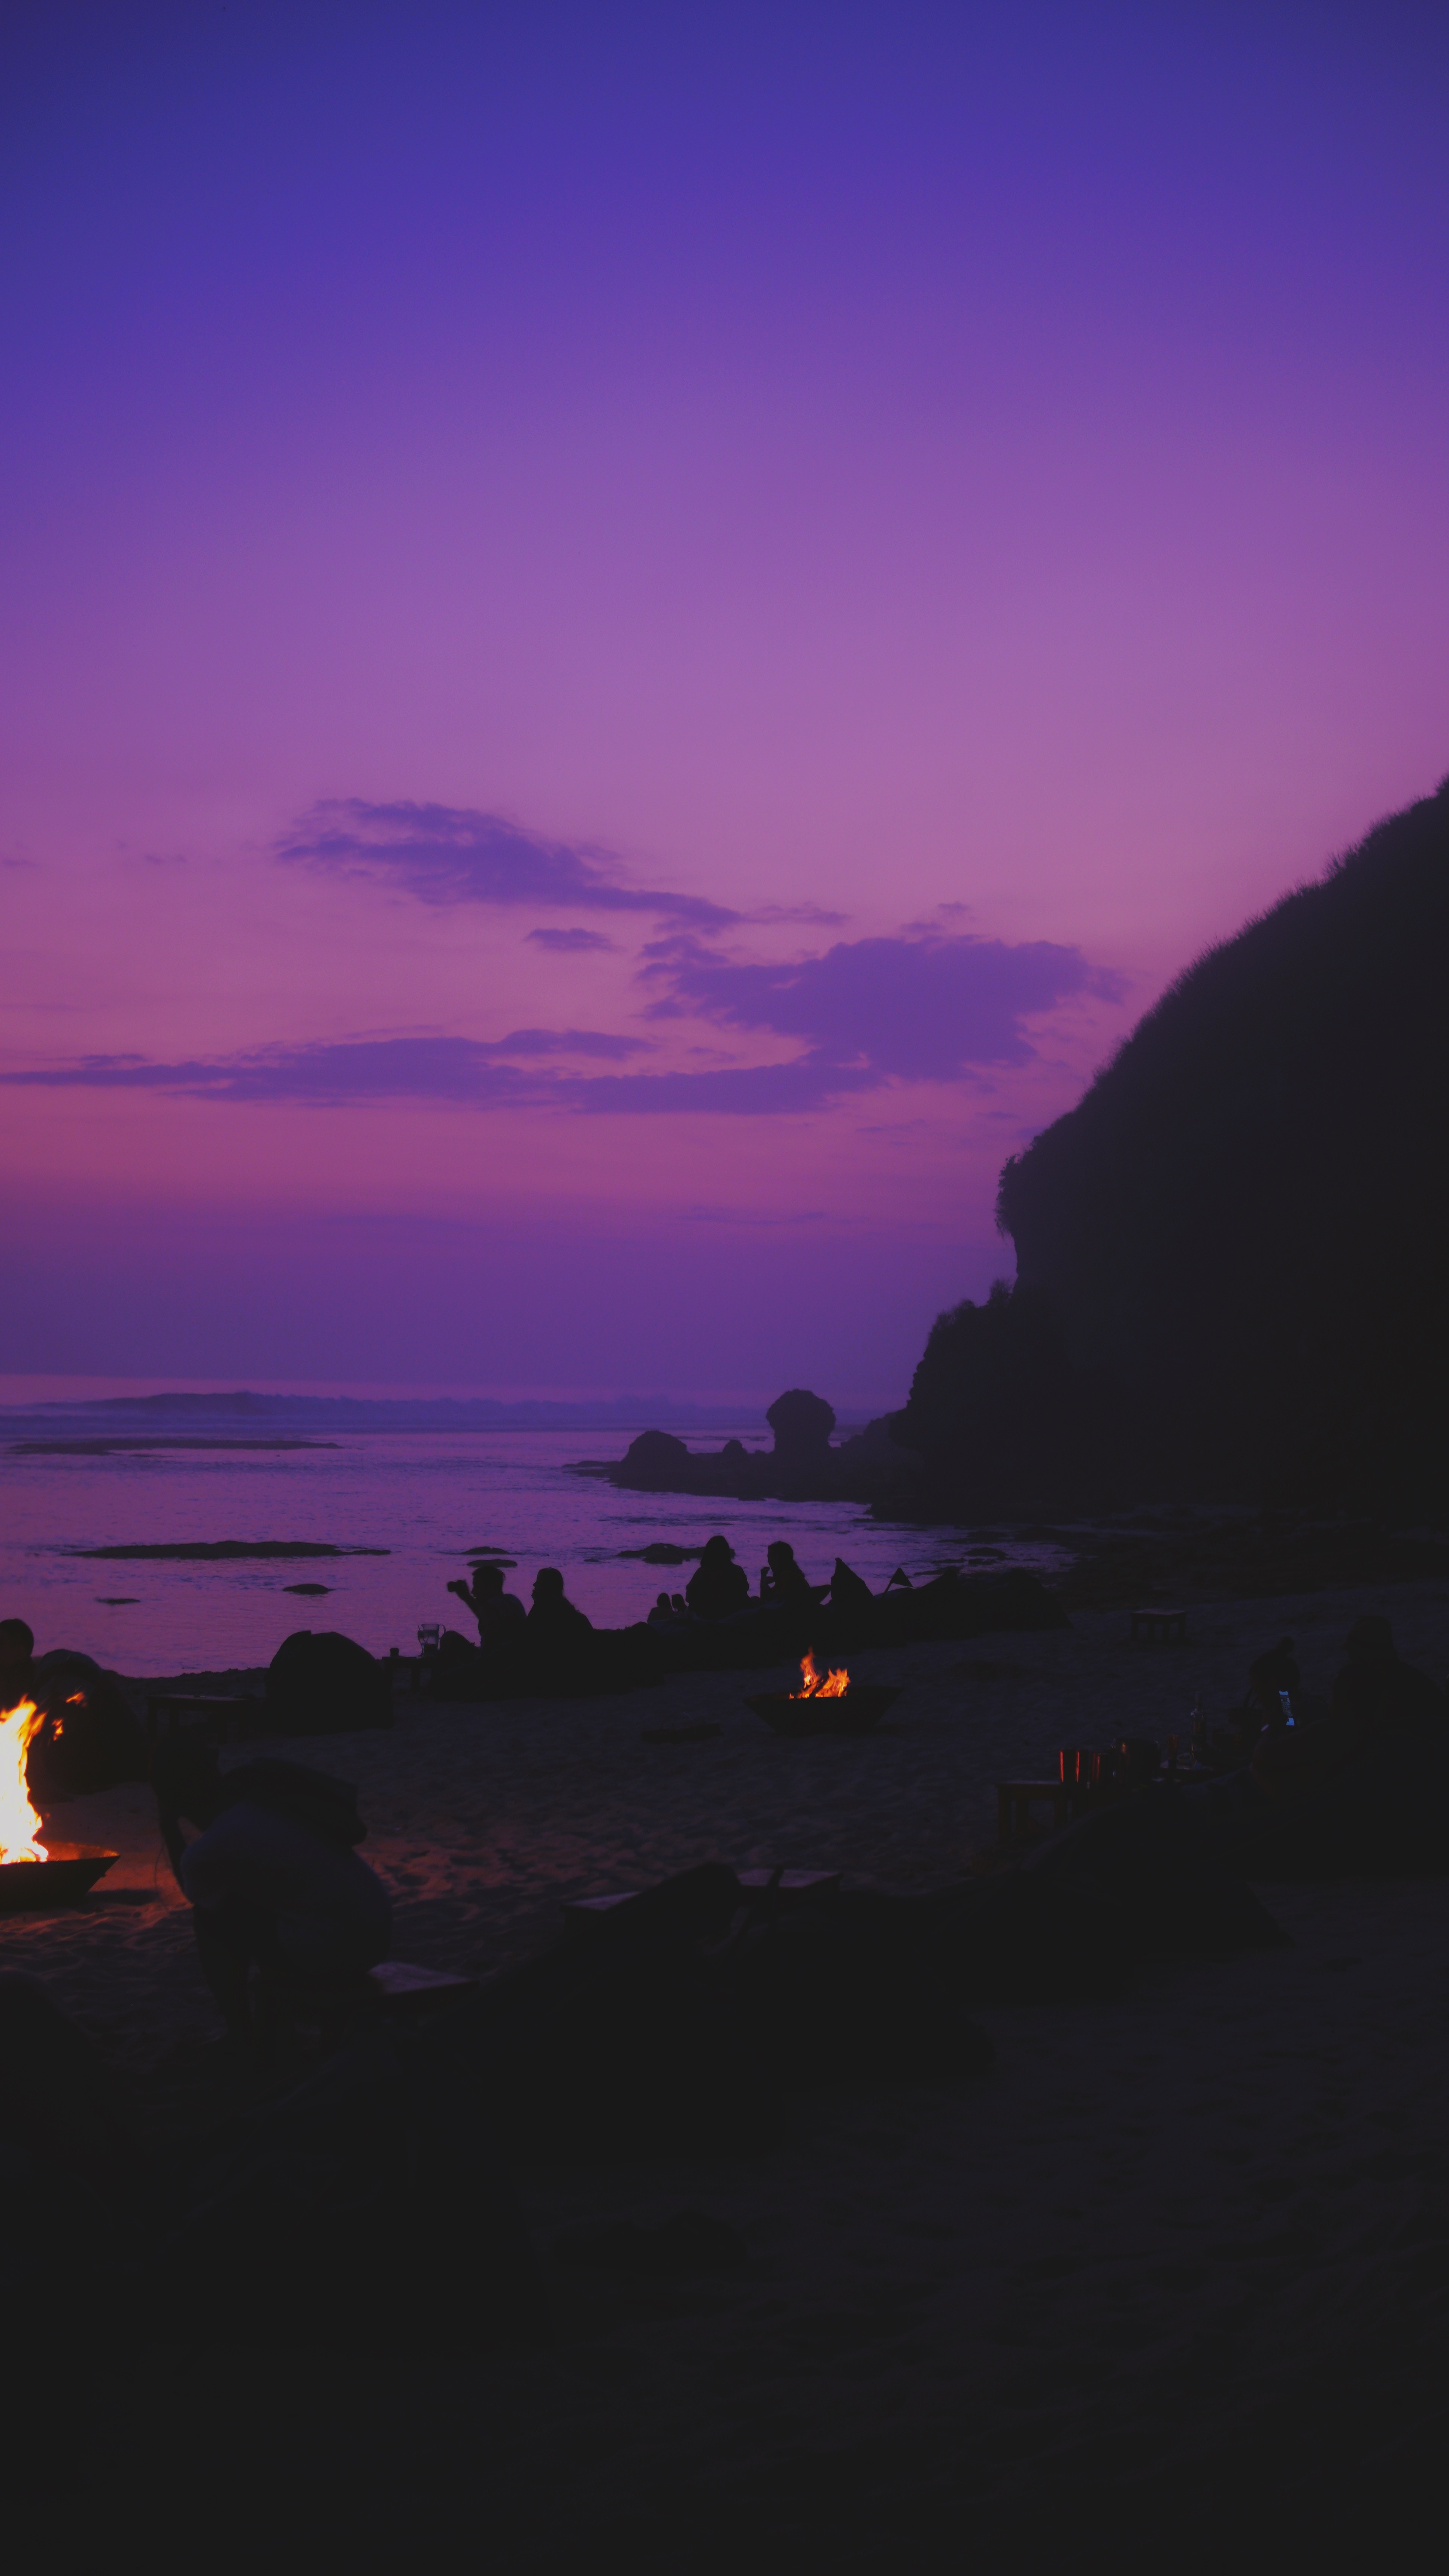 indonesia, relaxation, beach, dark, silhouettes, sunset, shore, bank, rest